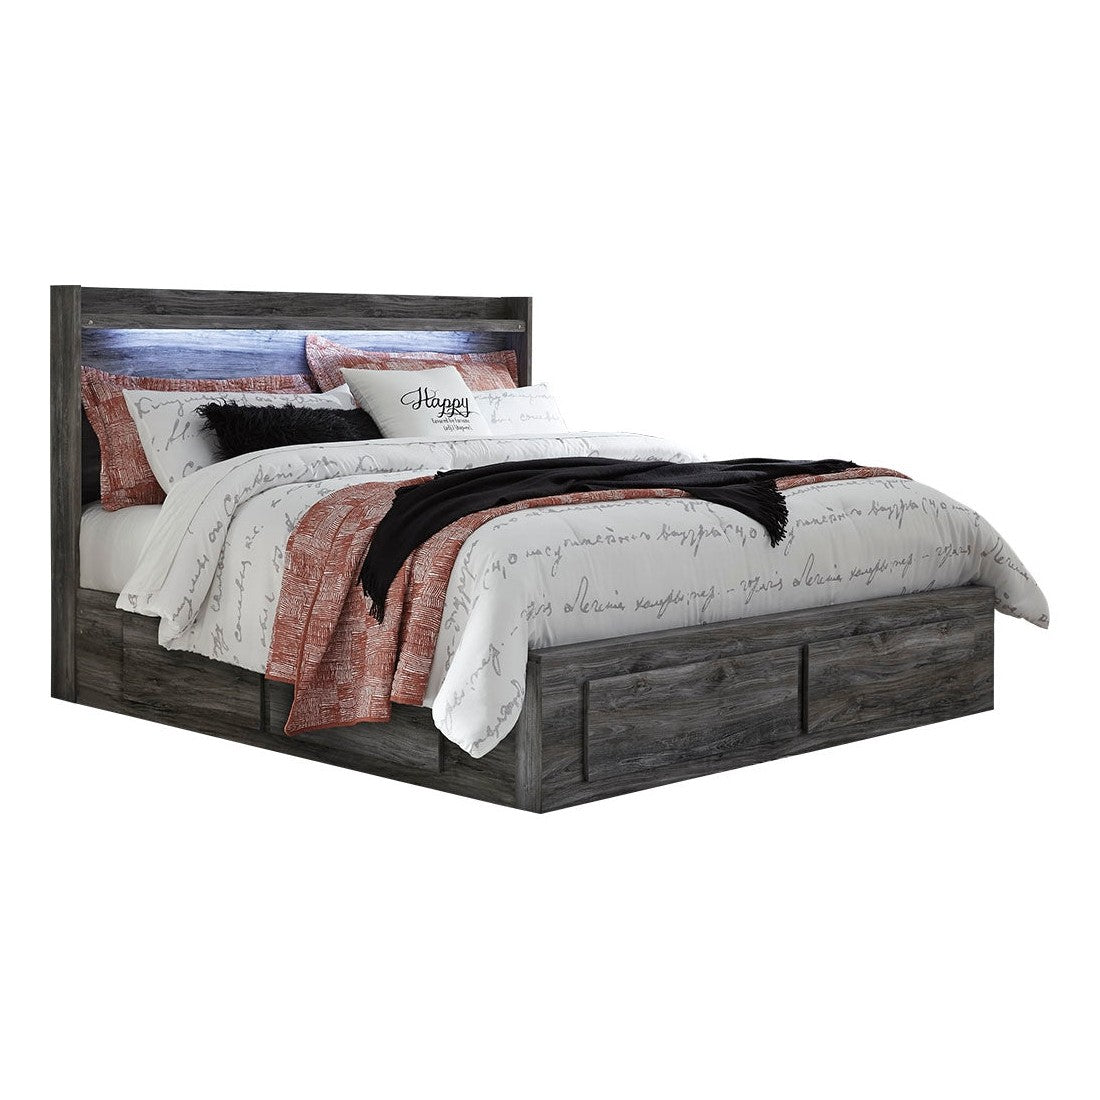 Baystorm Panel Bed with 4 Storage Drawers Ash-B221B15